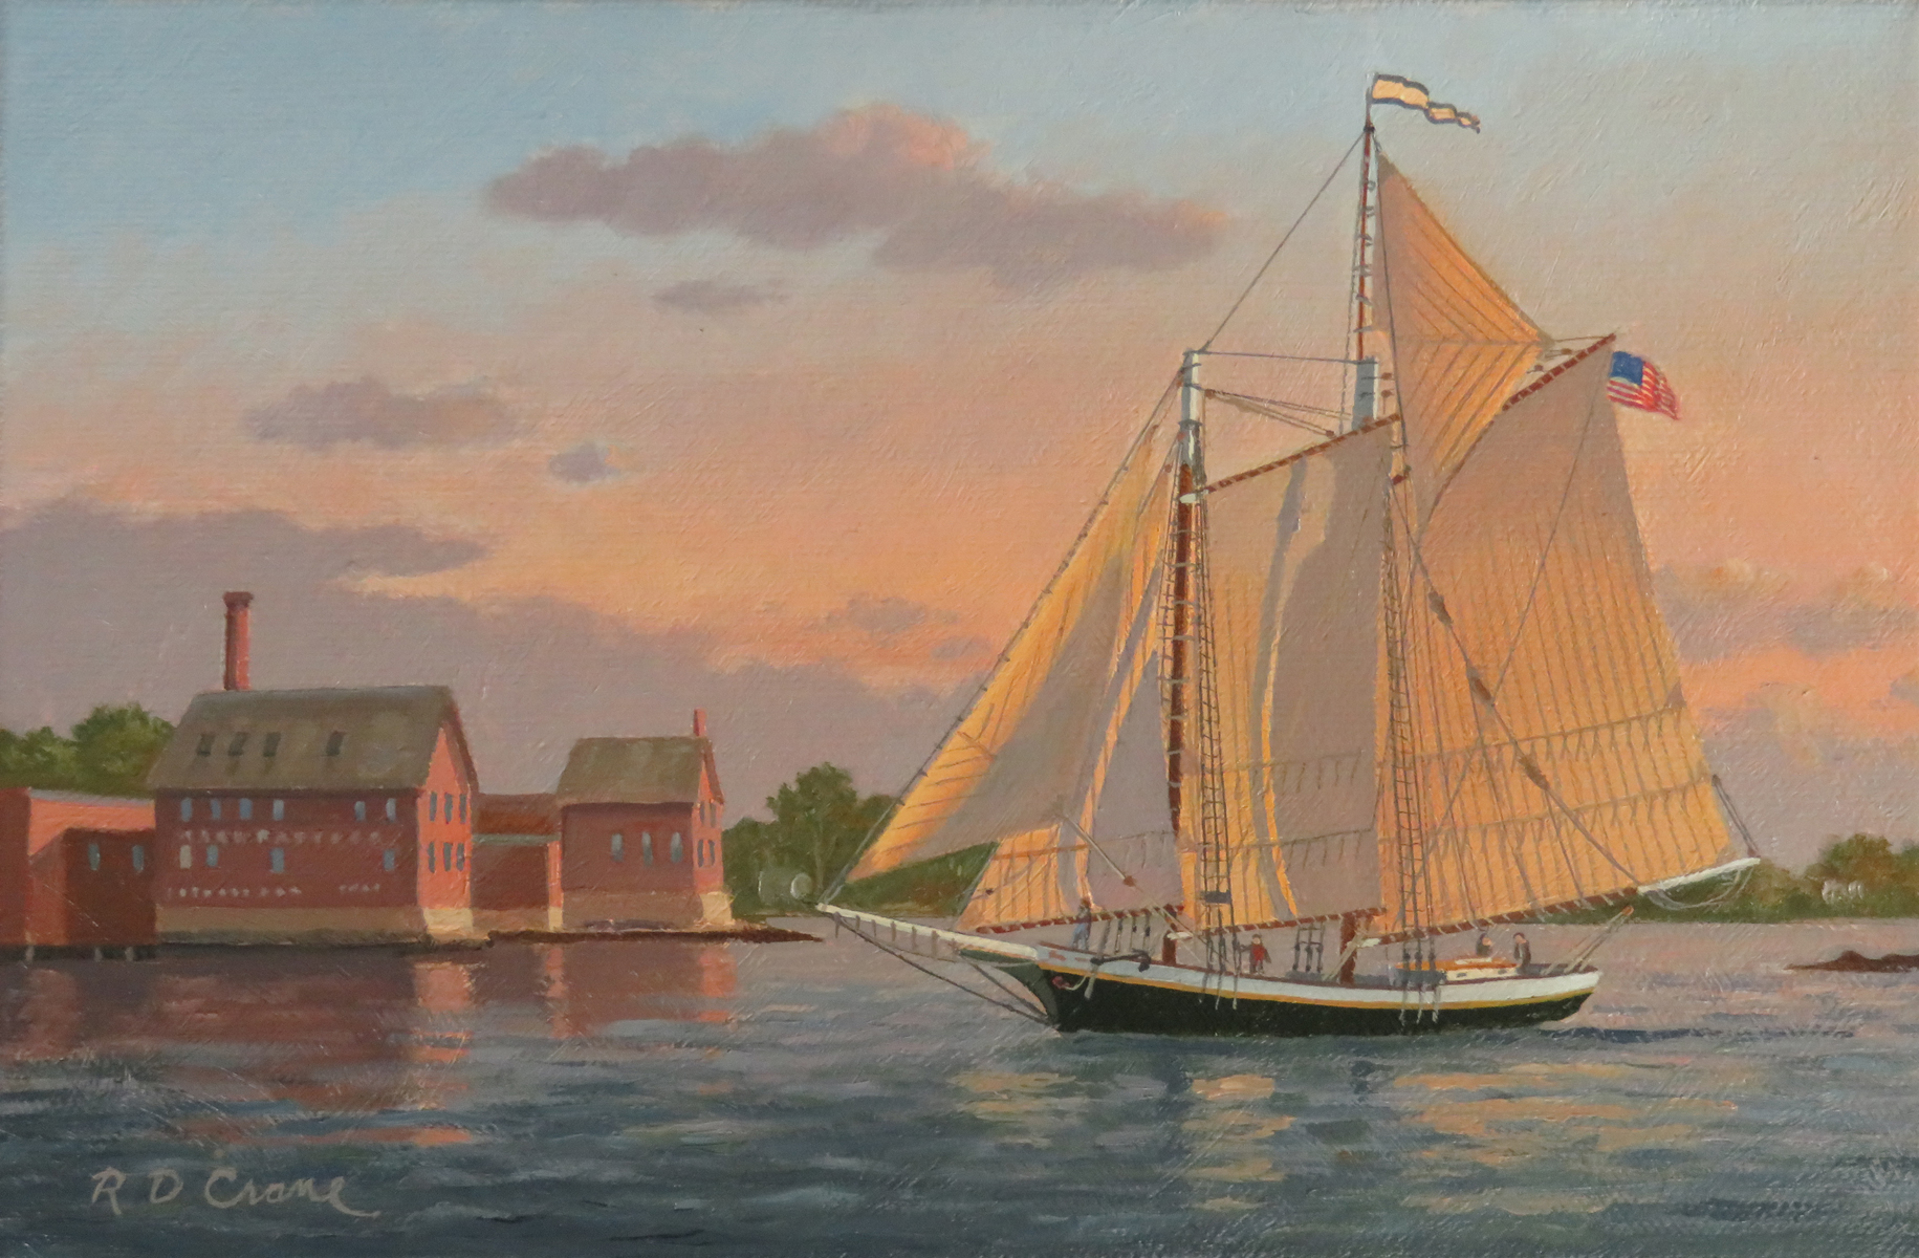 Gloucester Arrival (Paint Factory) by Ray Crane